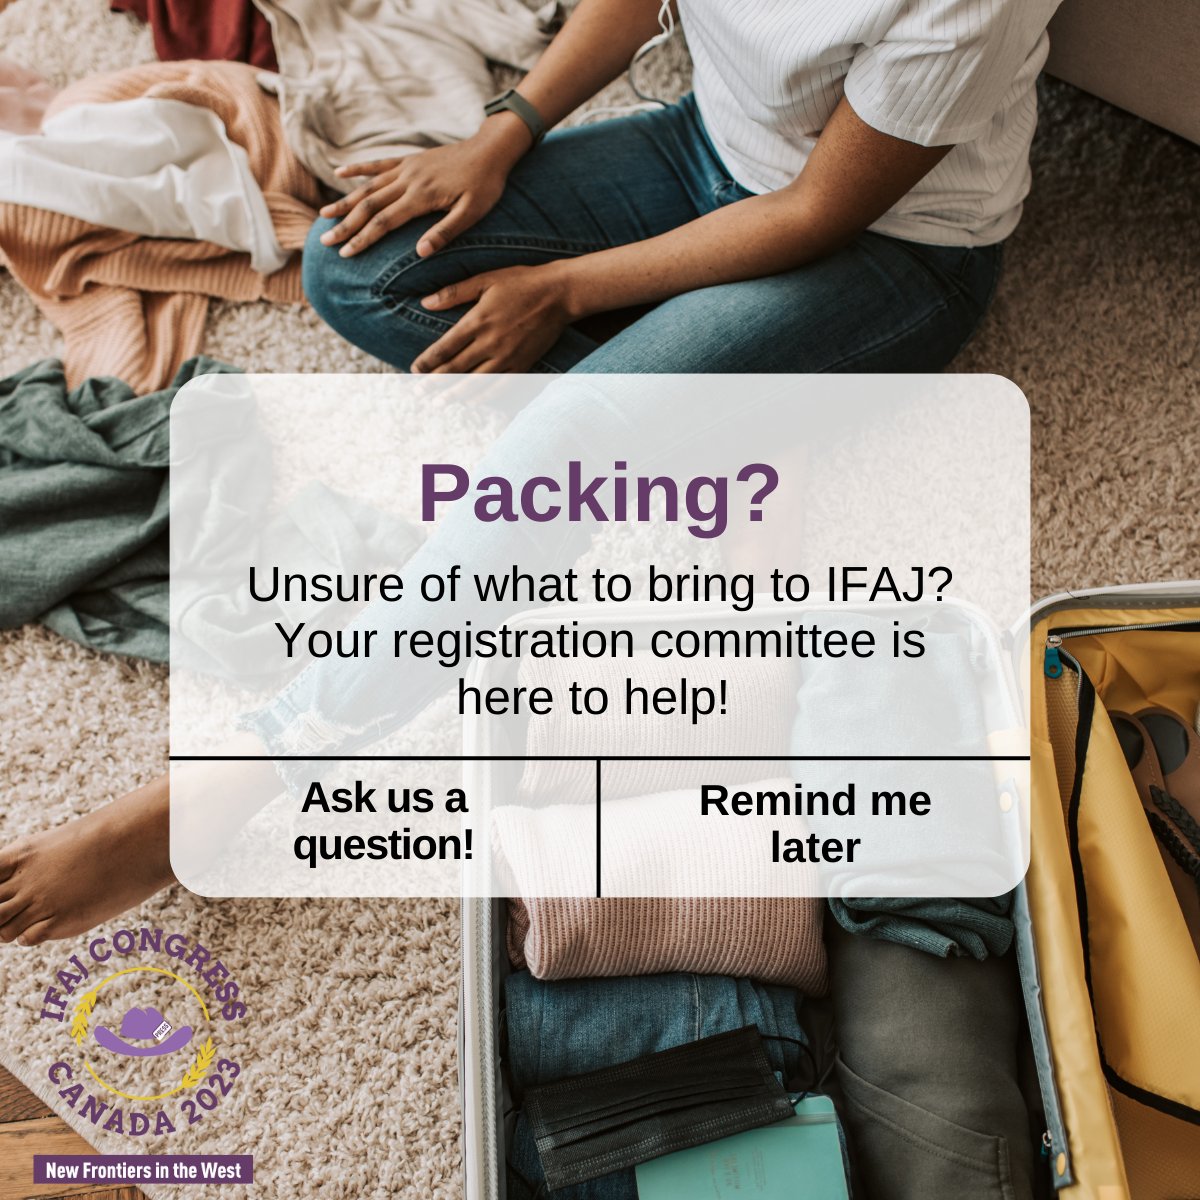 Not sure what to pack? Think you might be forgetting something? Our Registration committee is here to help! Send us a note and we’d be more than happy to assist you! #IFAJ23 #agmedia #agcomms #CFWF